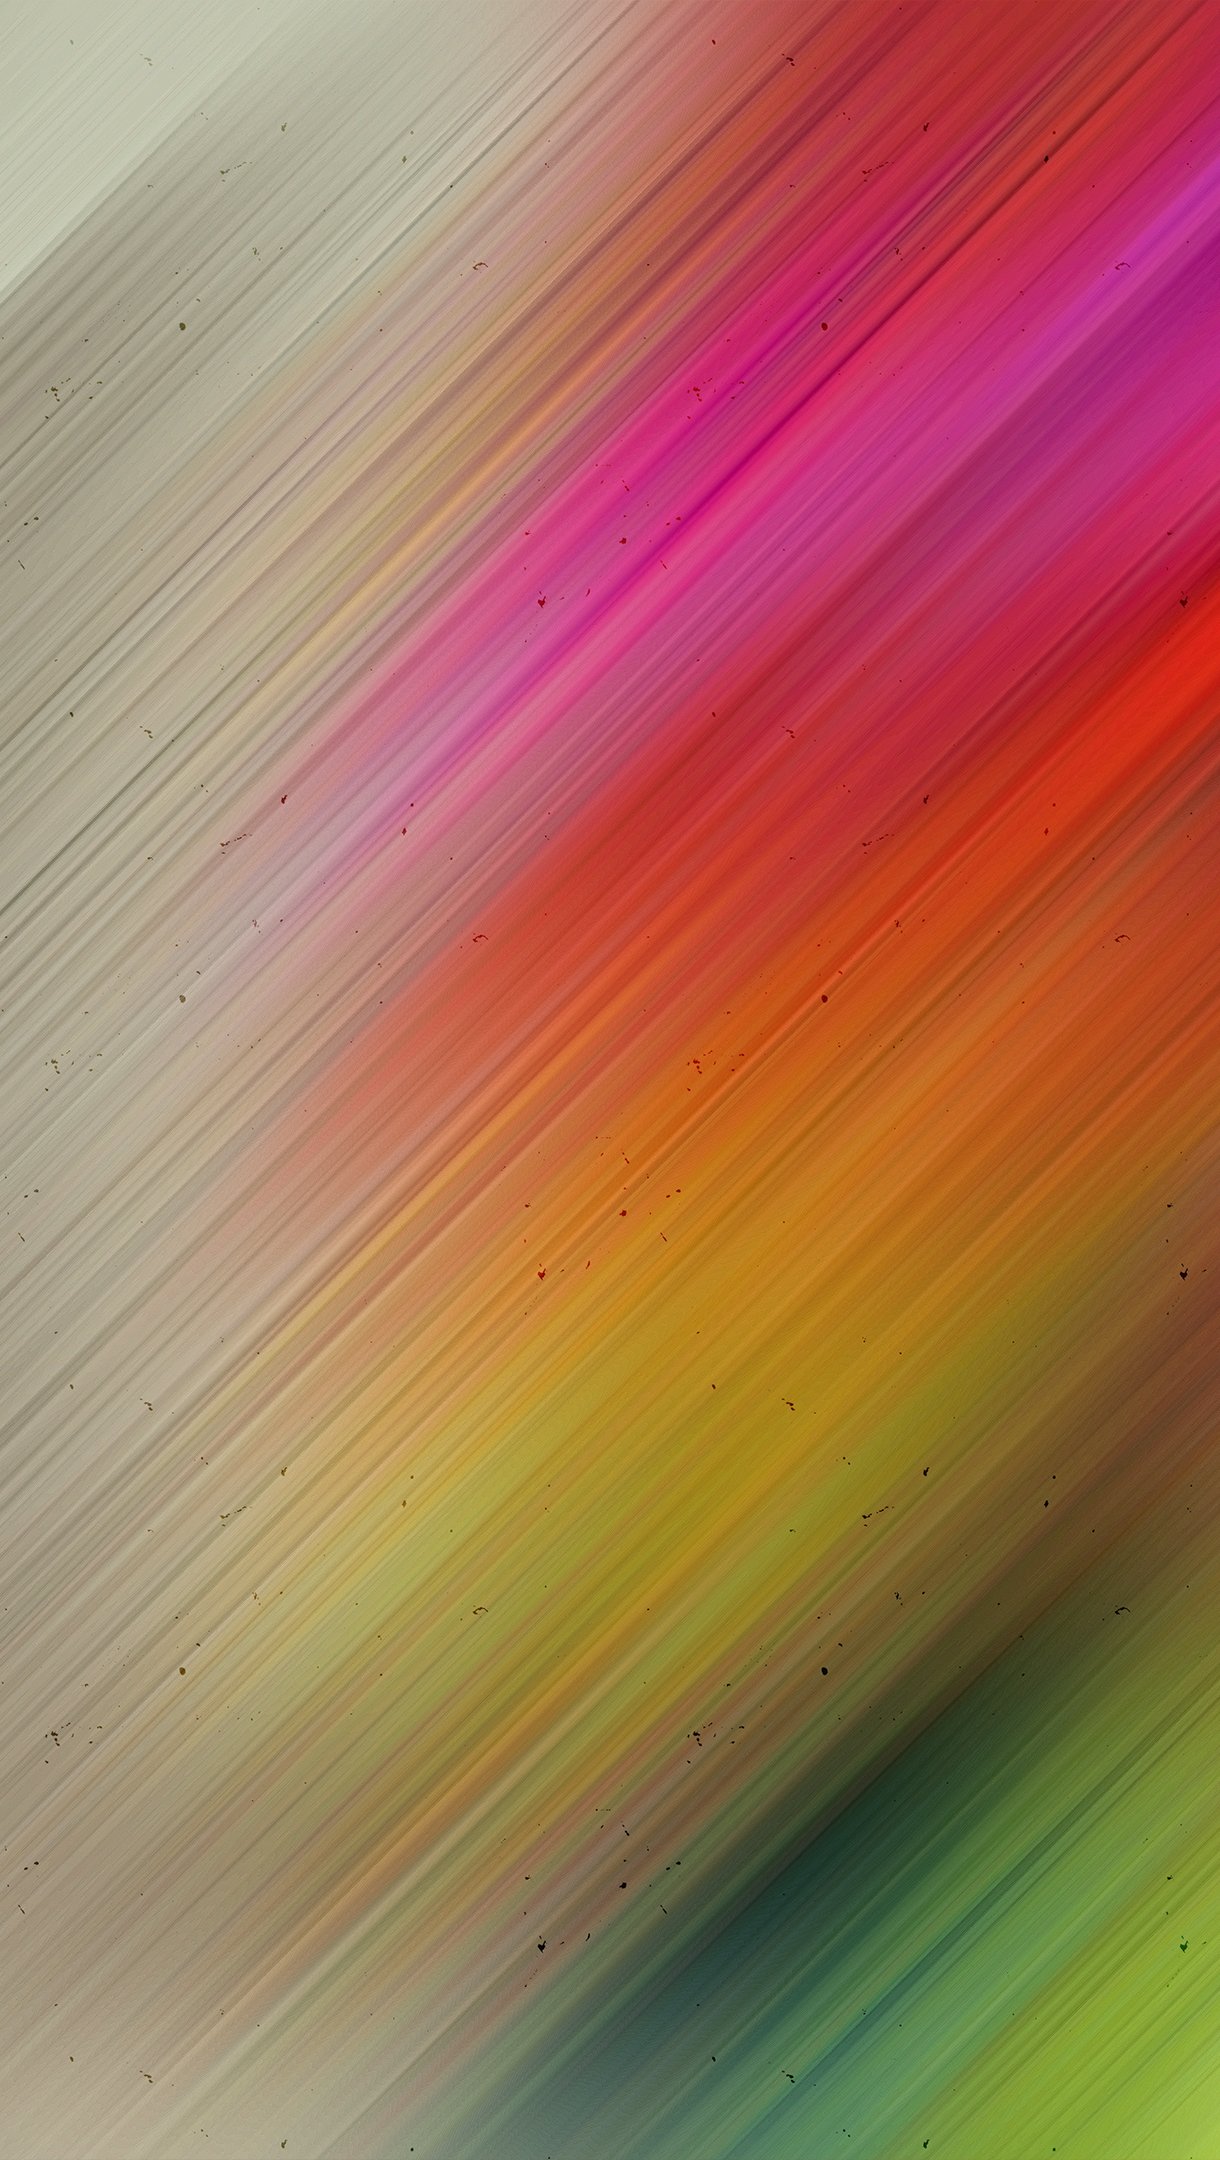 Wallpaper Blurry colors abstract Vertical